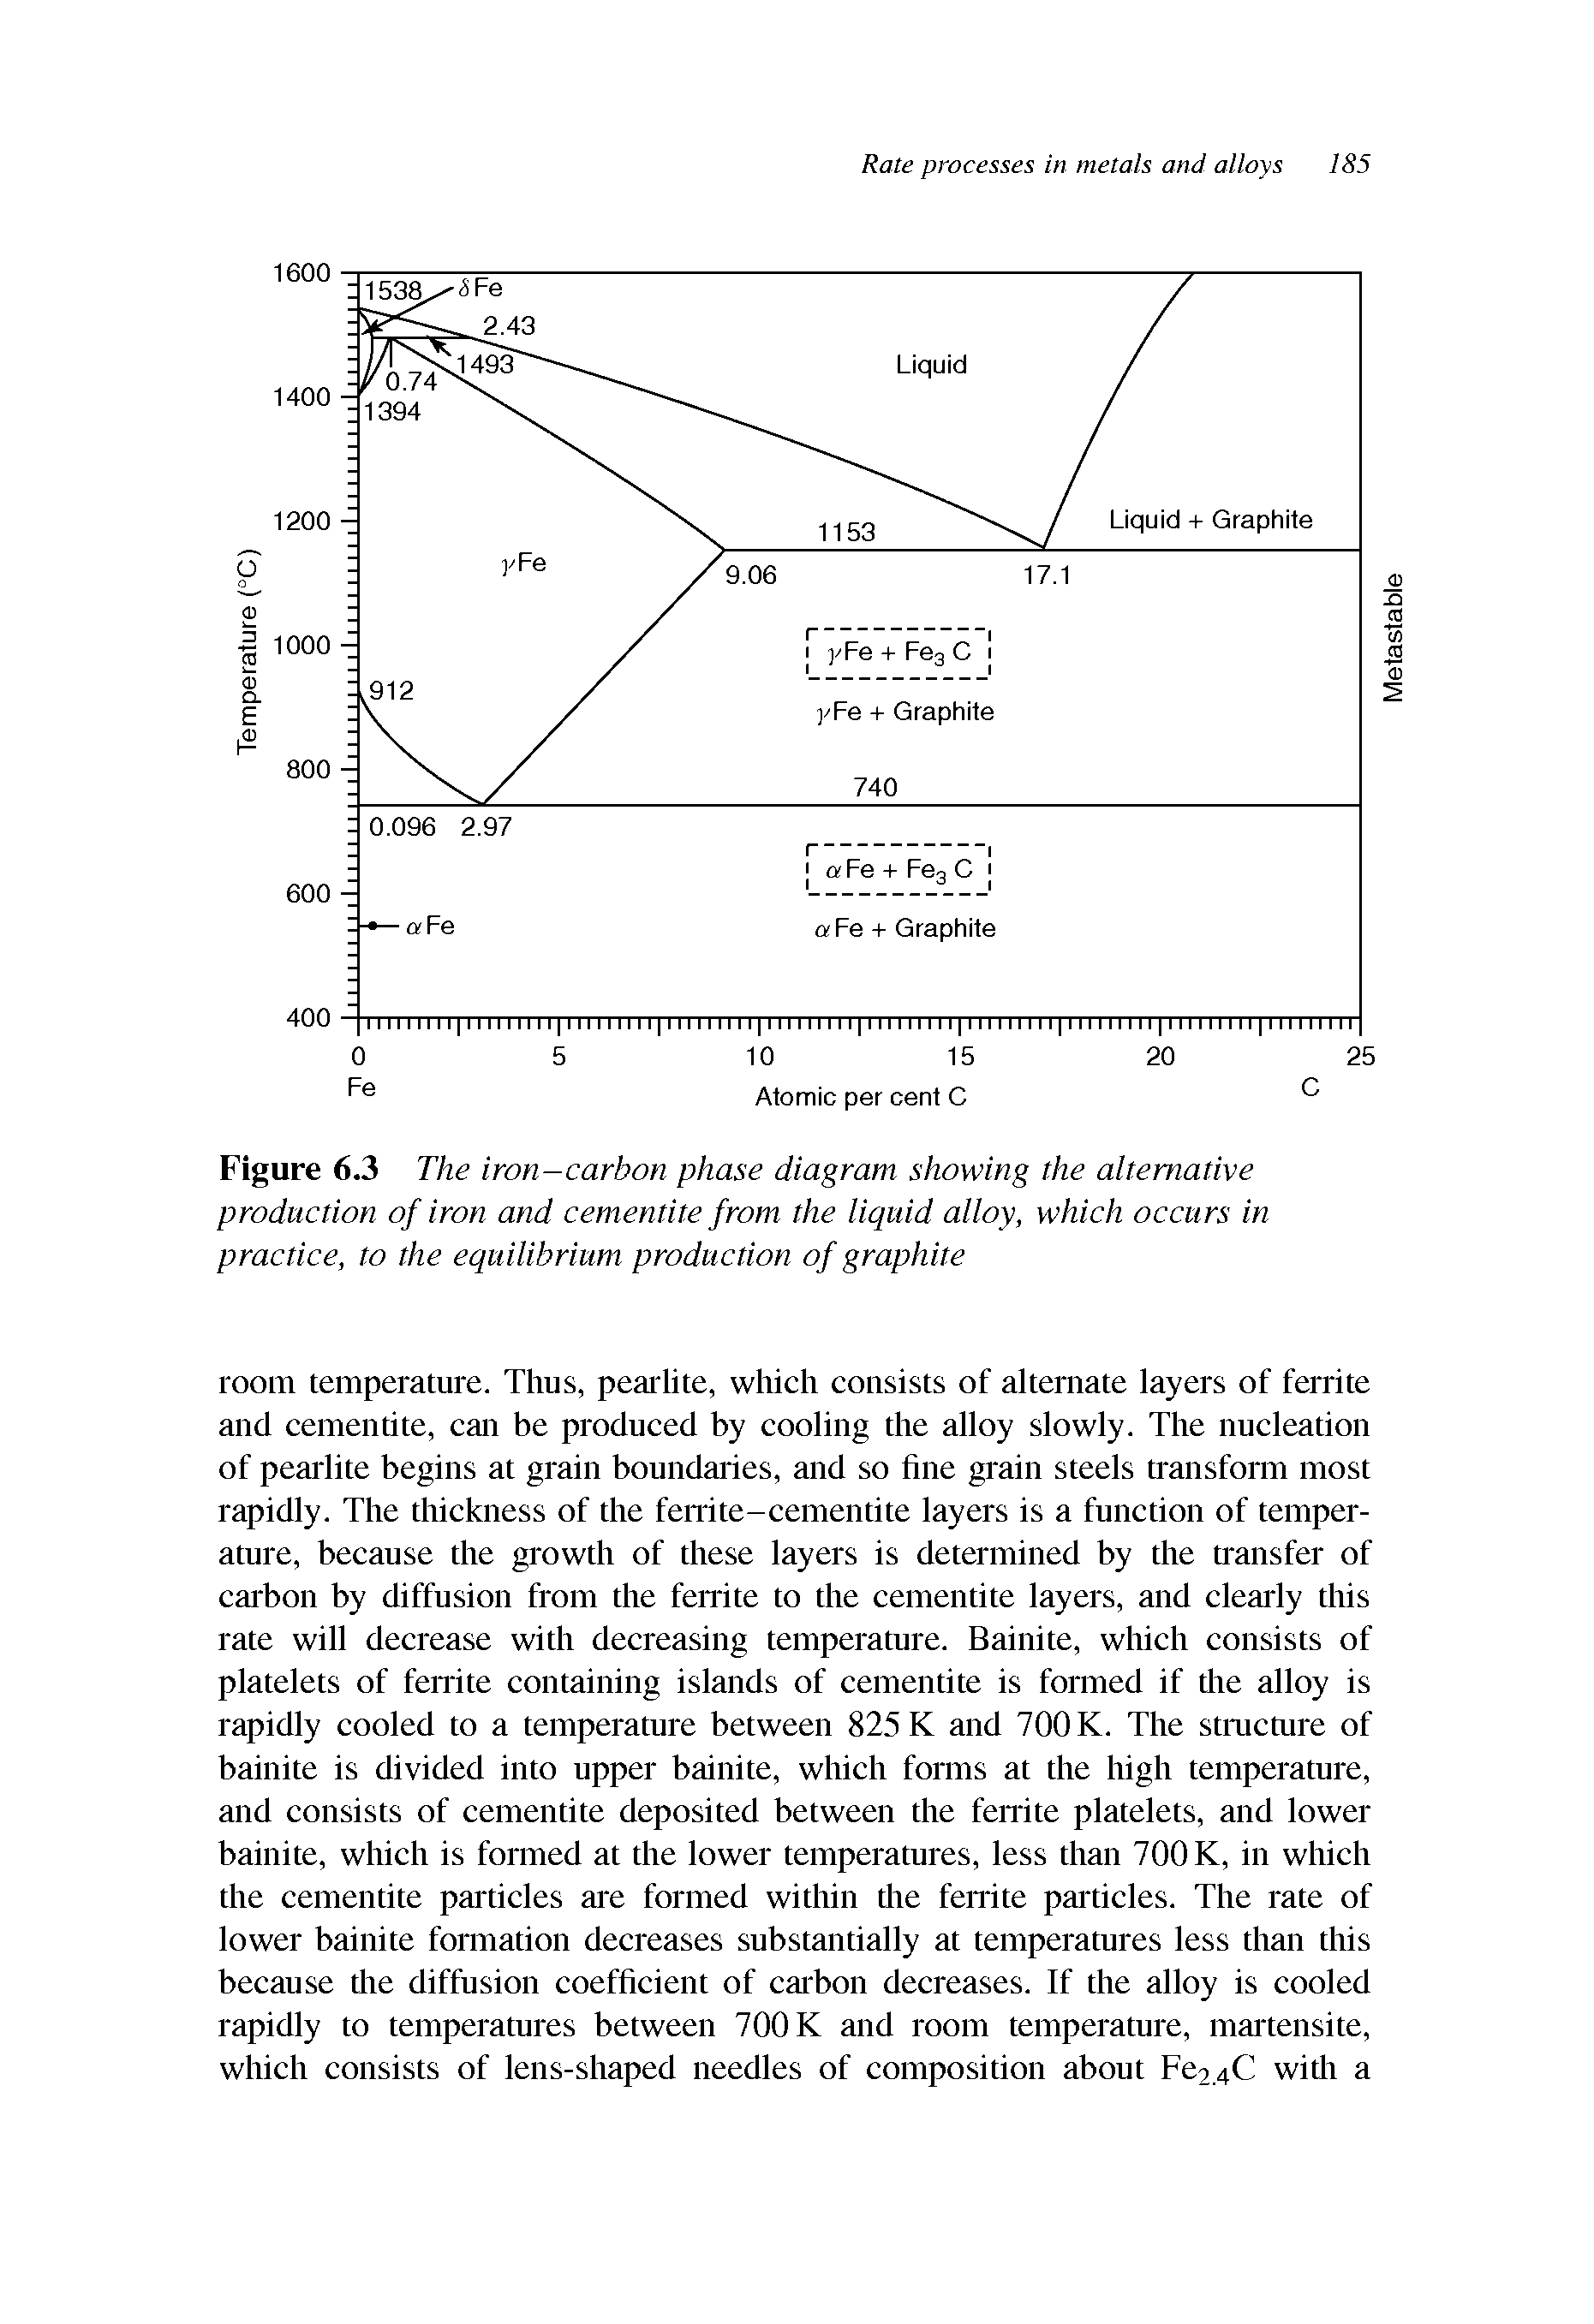 Figure 6.3 The iron-carbon phase diagram showing the alternative production of iron and cementite from the liquid alloy, which occurs in practice, to the equilibrium production of graphite...